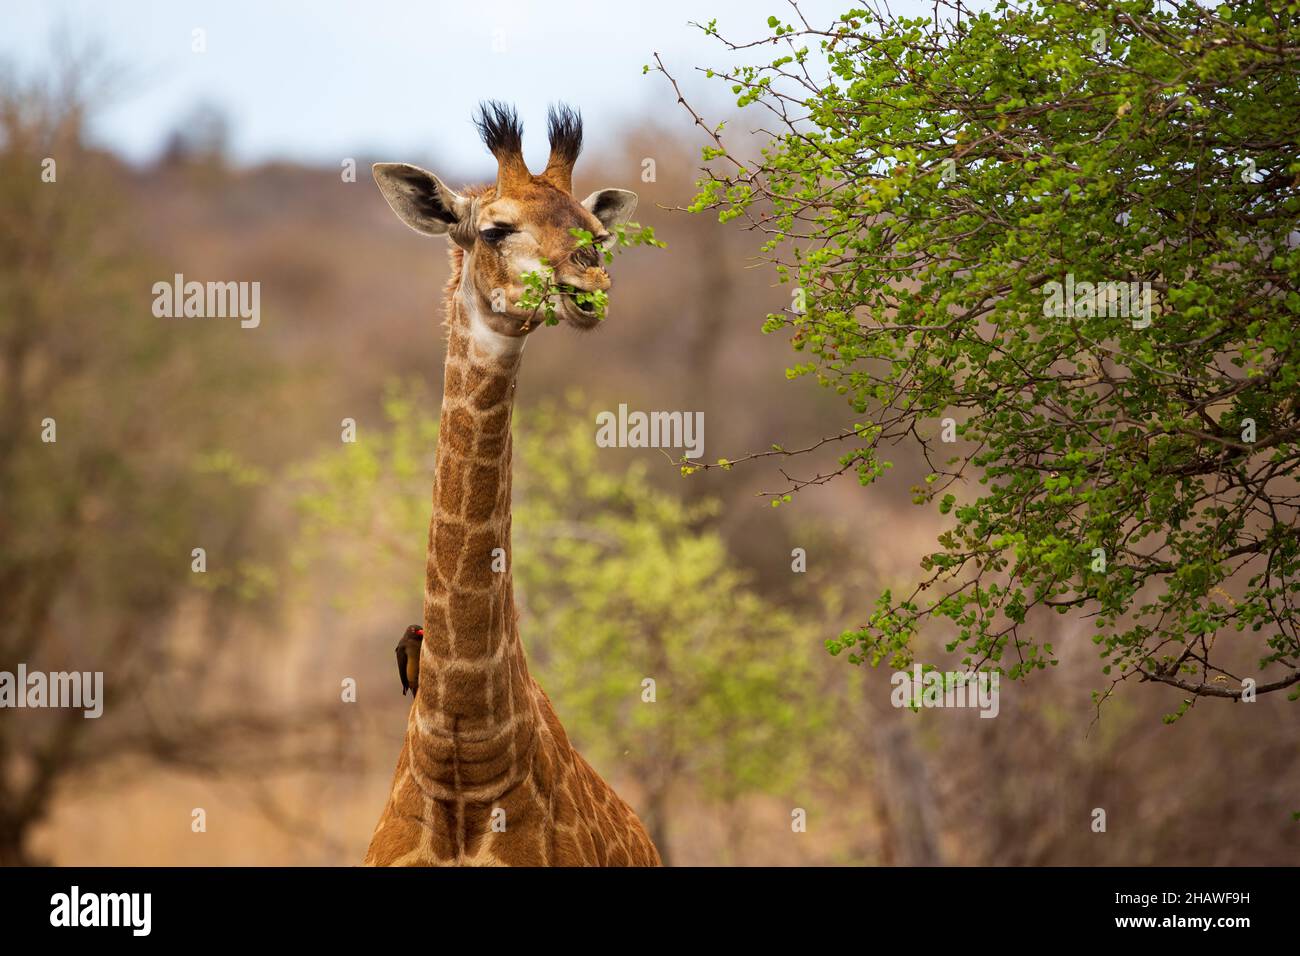 Frontal view of giraffe feeding from a tree, Kruger National Park, South Africa Stock Photo